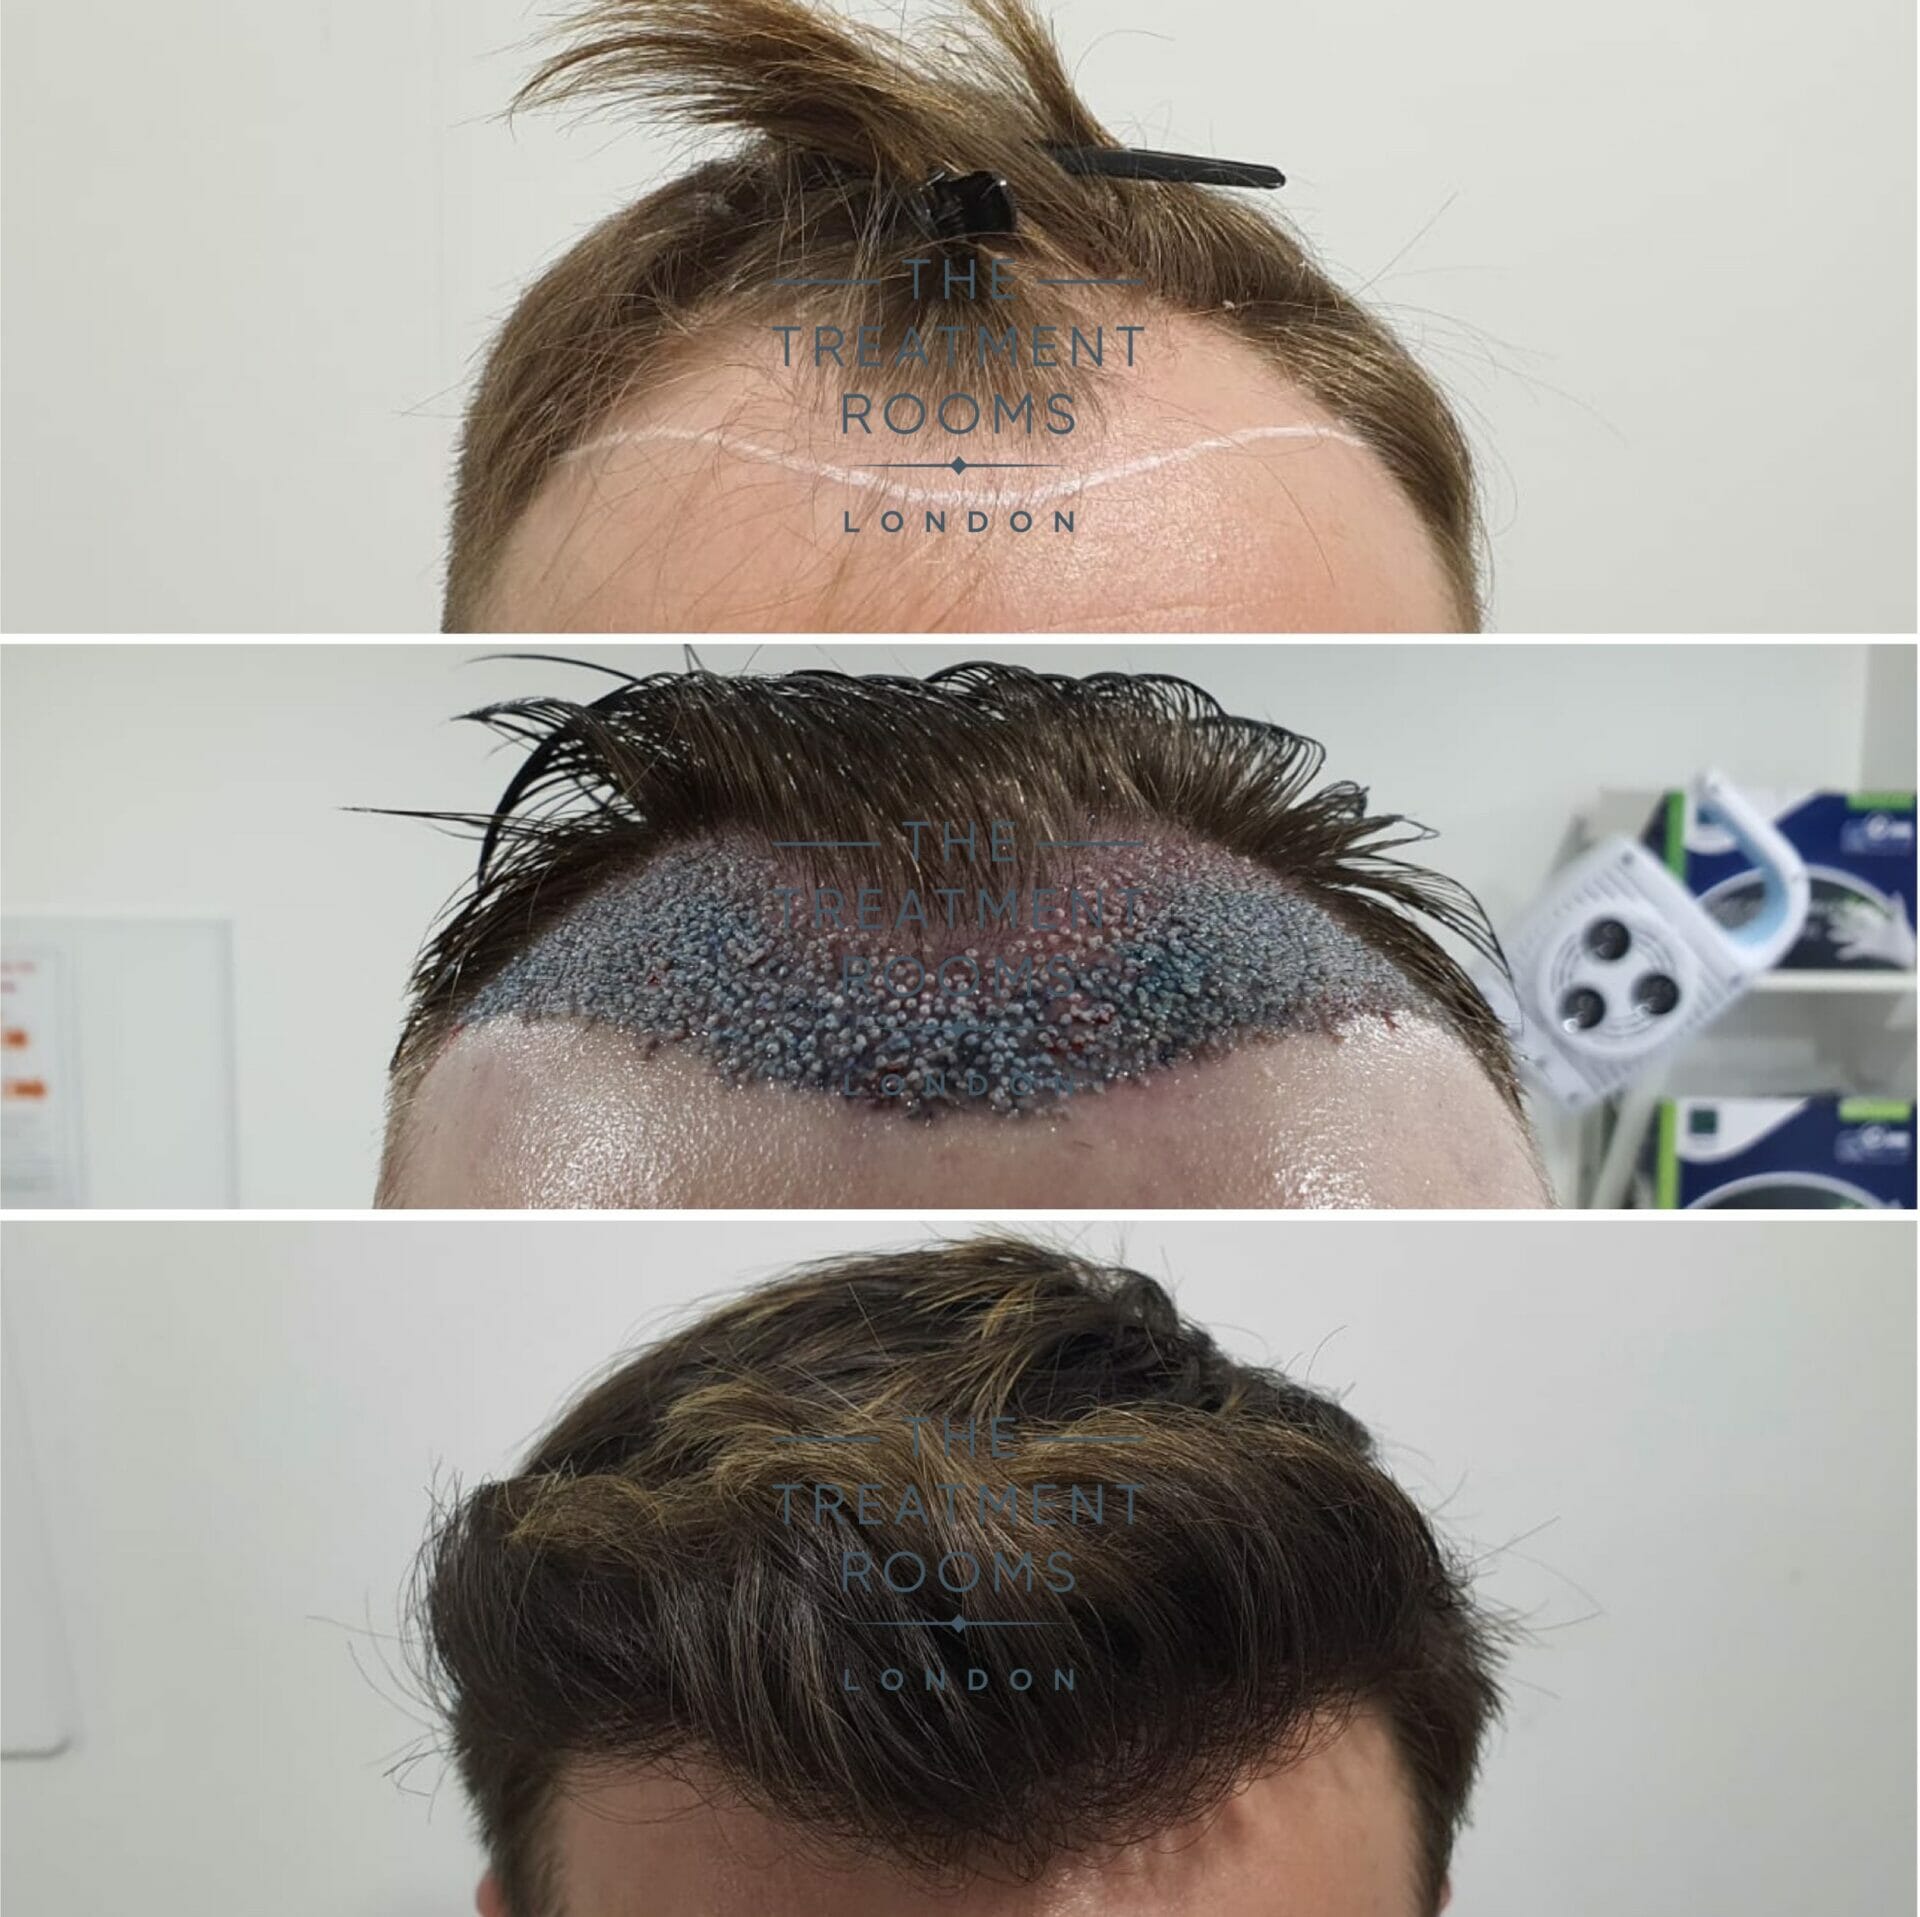 Cost of Hair Transplantation in India